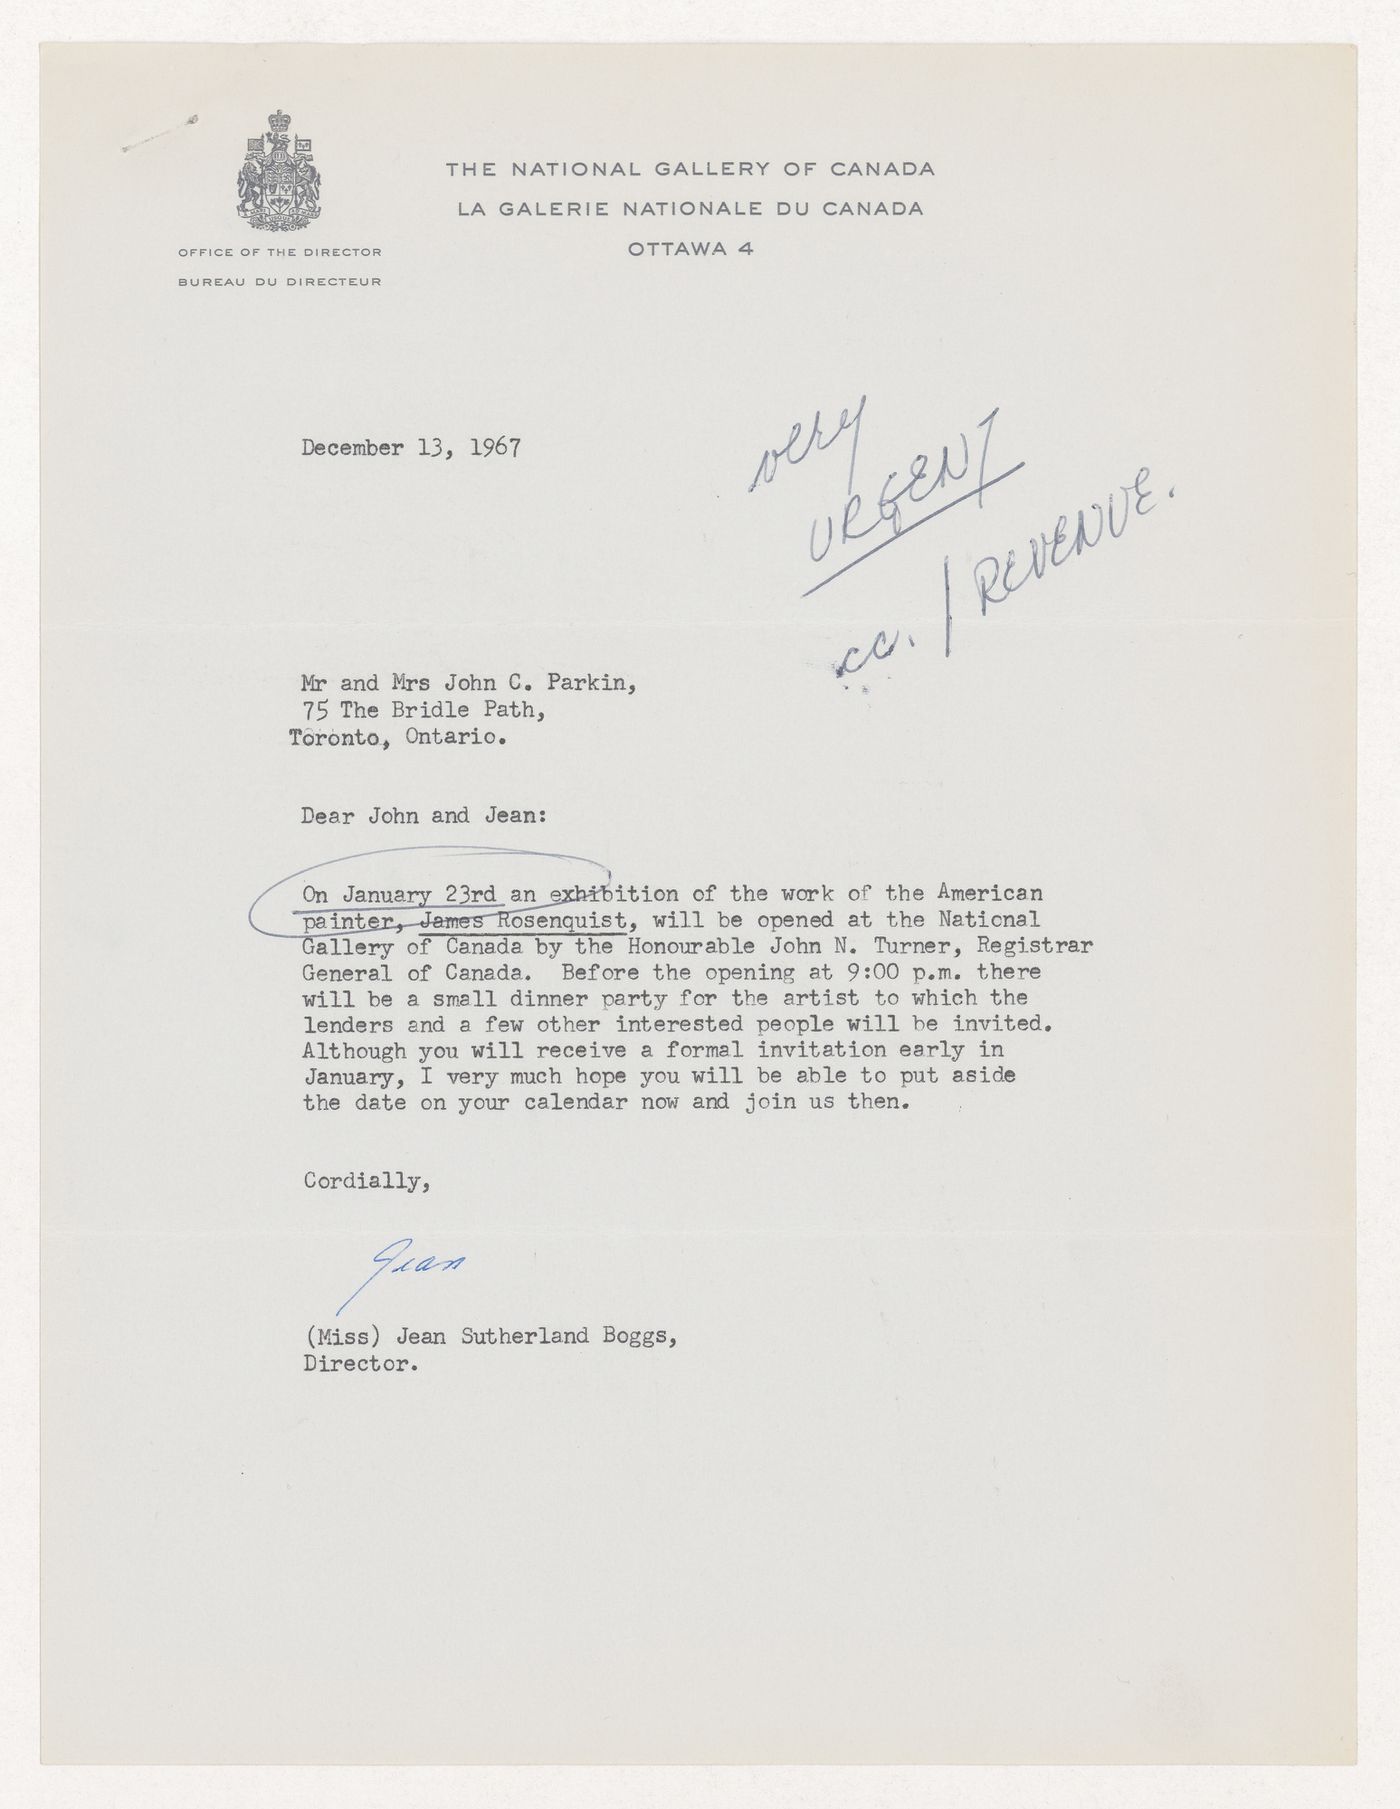 Correspondence between National Gallery of Canada director Joan Sutherland Boggs and Parkin about invitation to dinner party for artist James Rosenquist